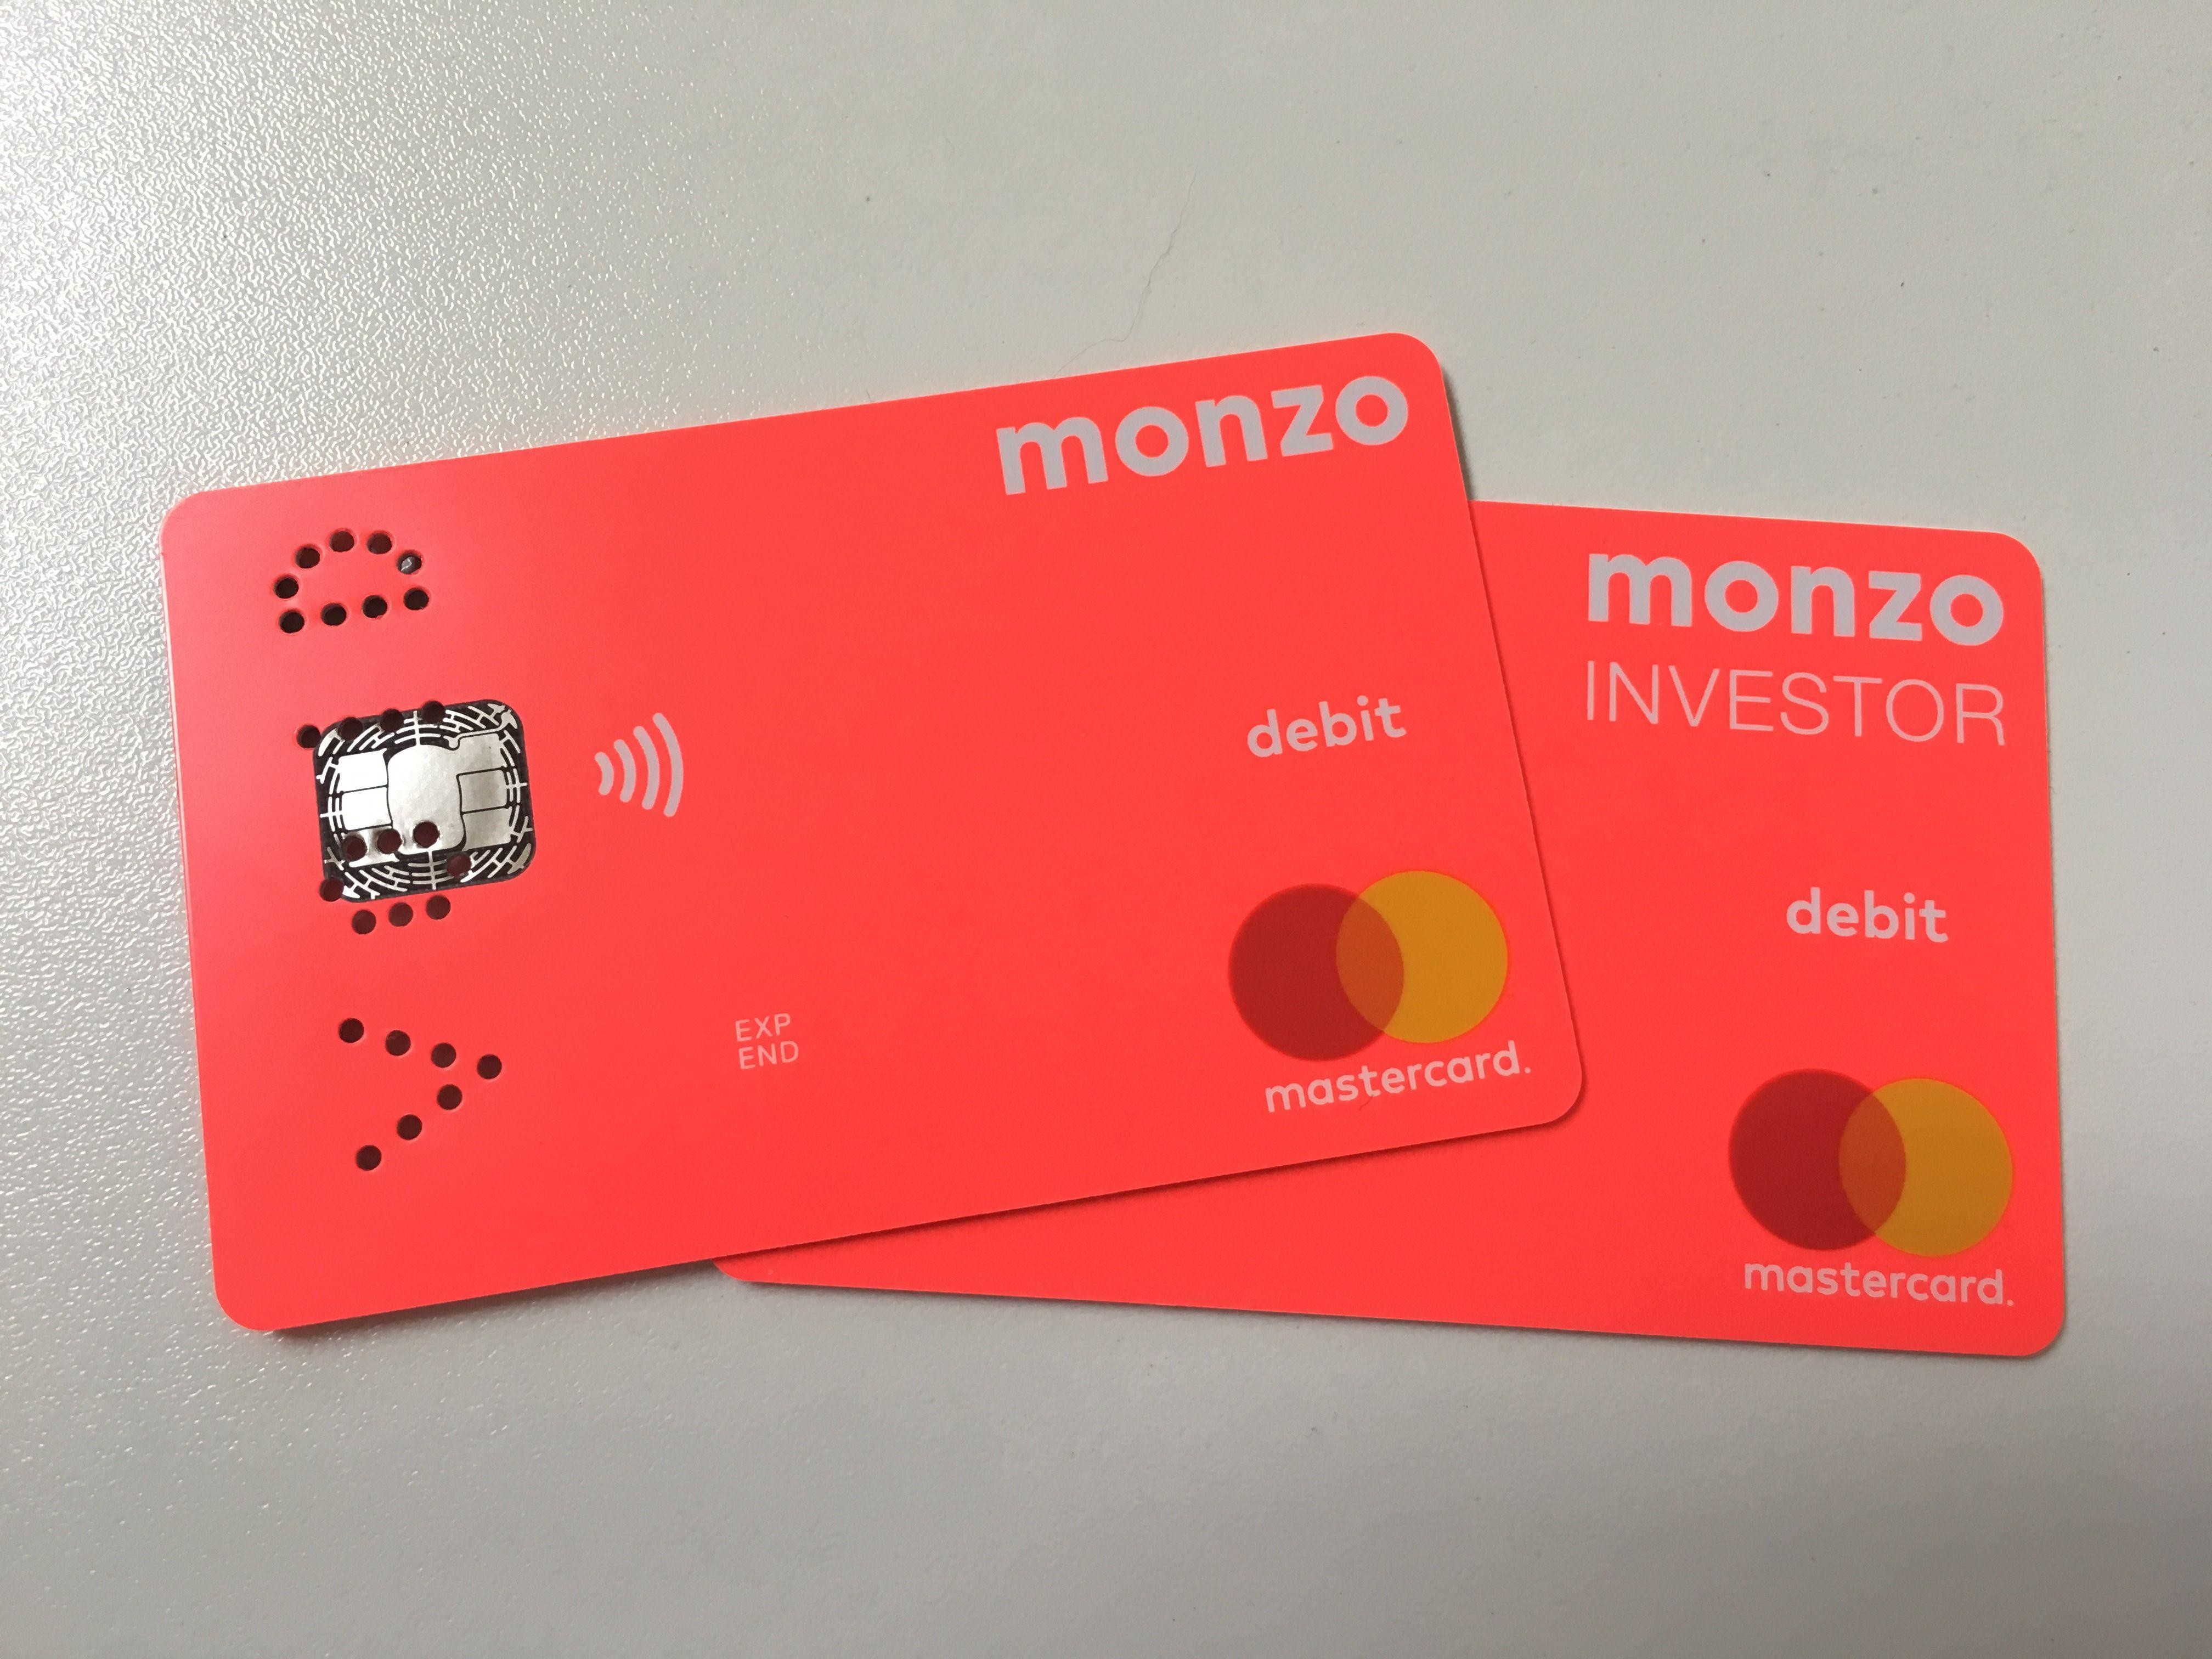 New MasterCard Logo - New Mastercard logo, haven't seen it in the wild yet - Monzo Chat ...